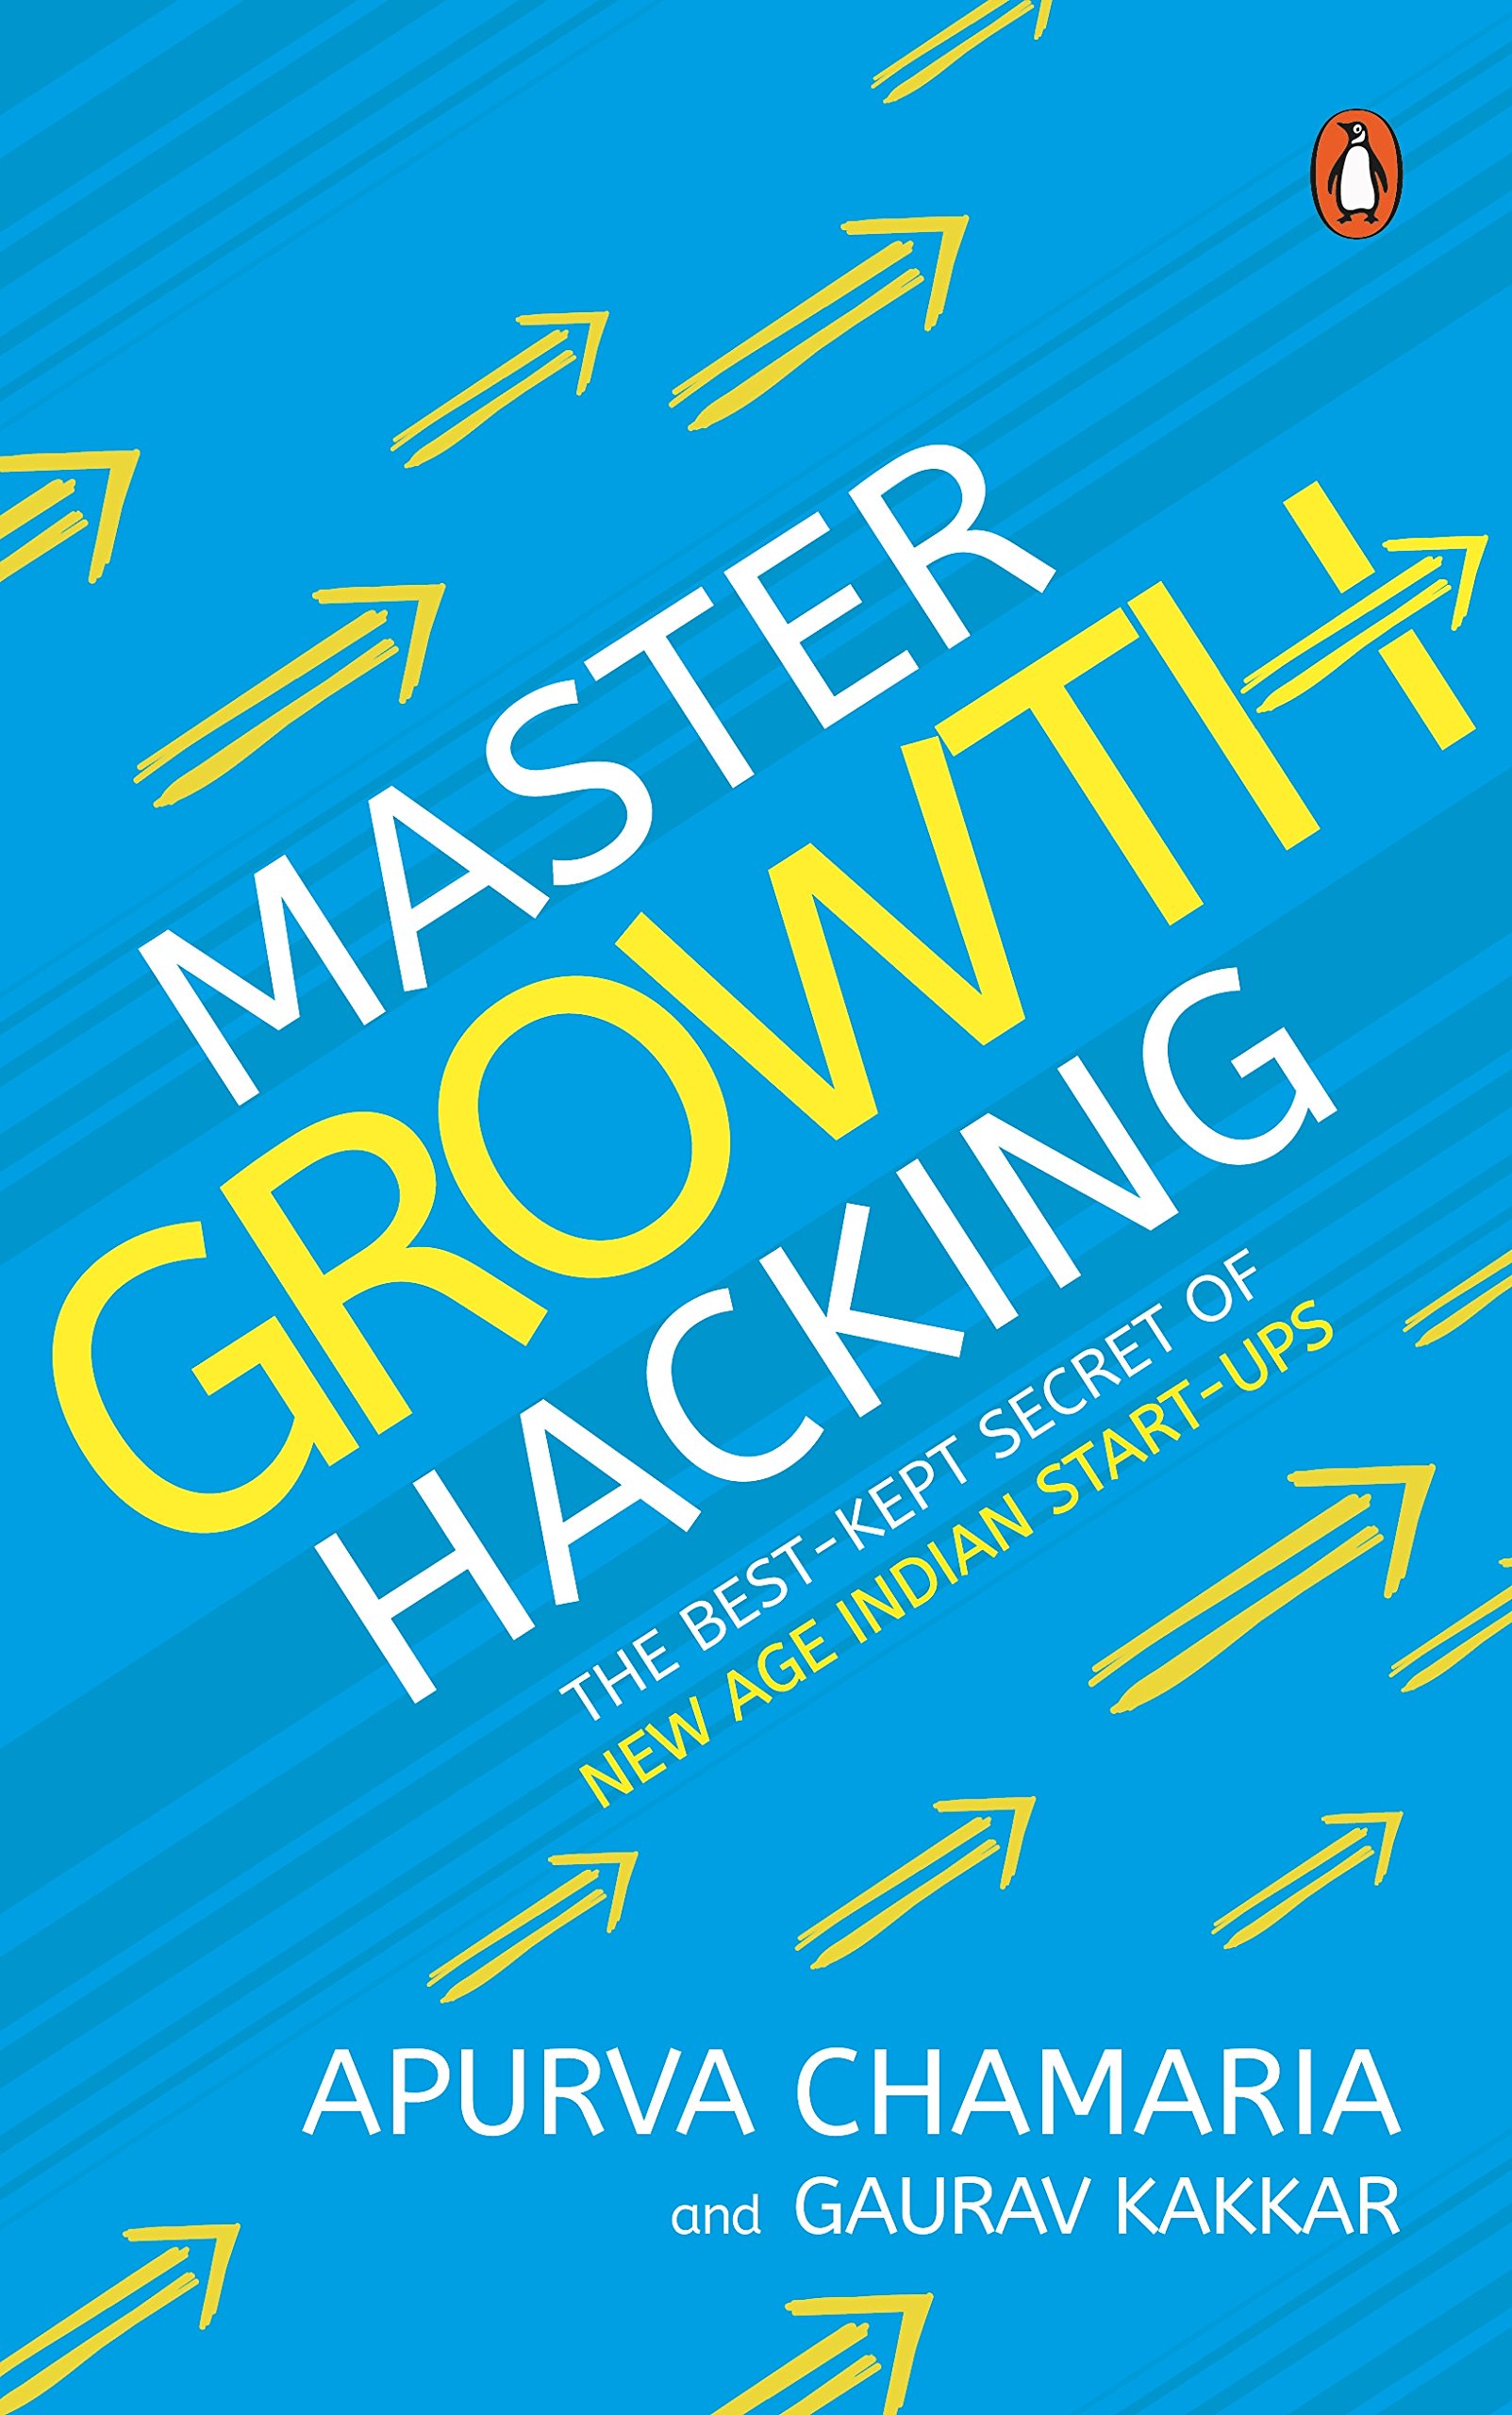 Book: MASTER GROWTH HACKING